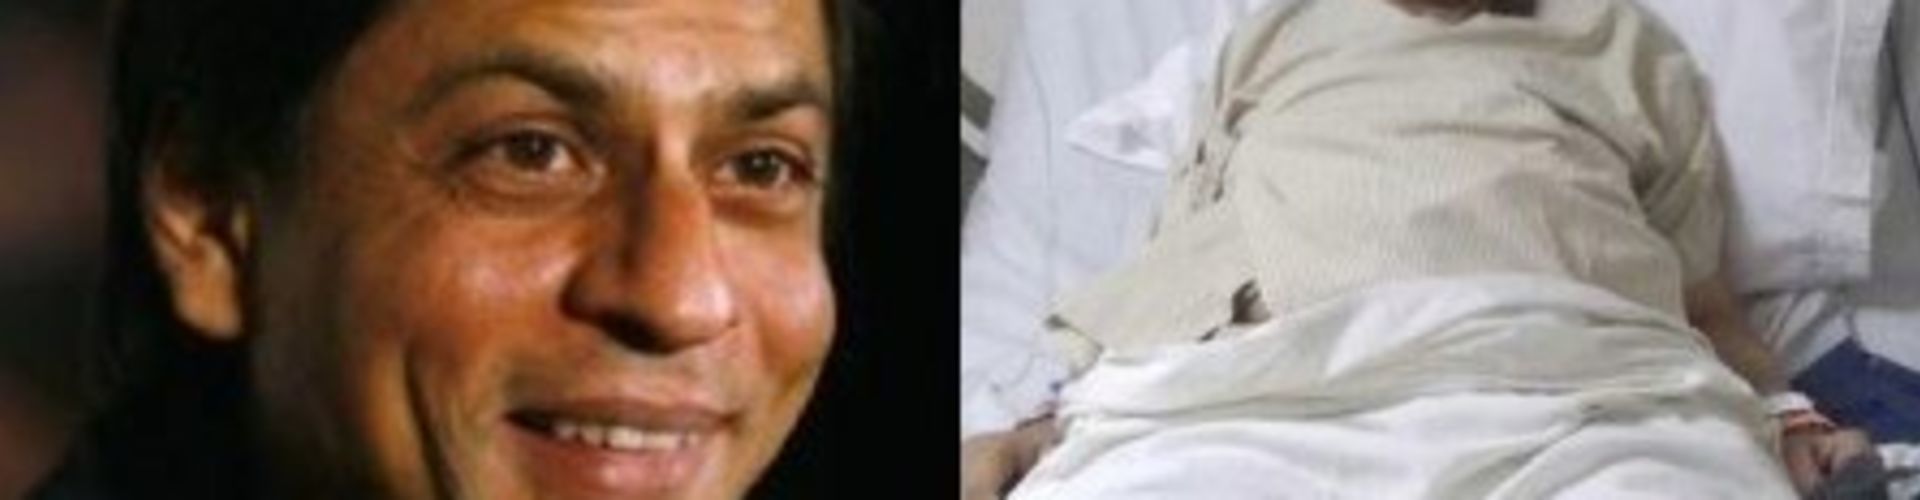 Shahrukh Khan Fulfills Wish Of A Dying Patient